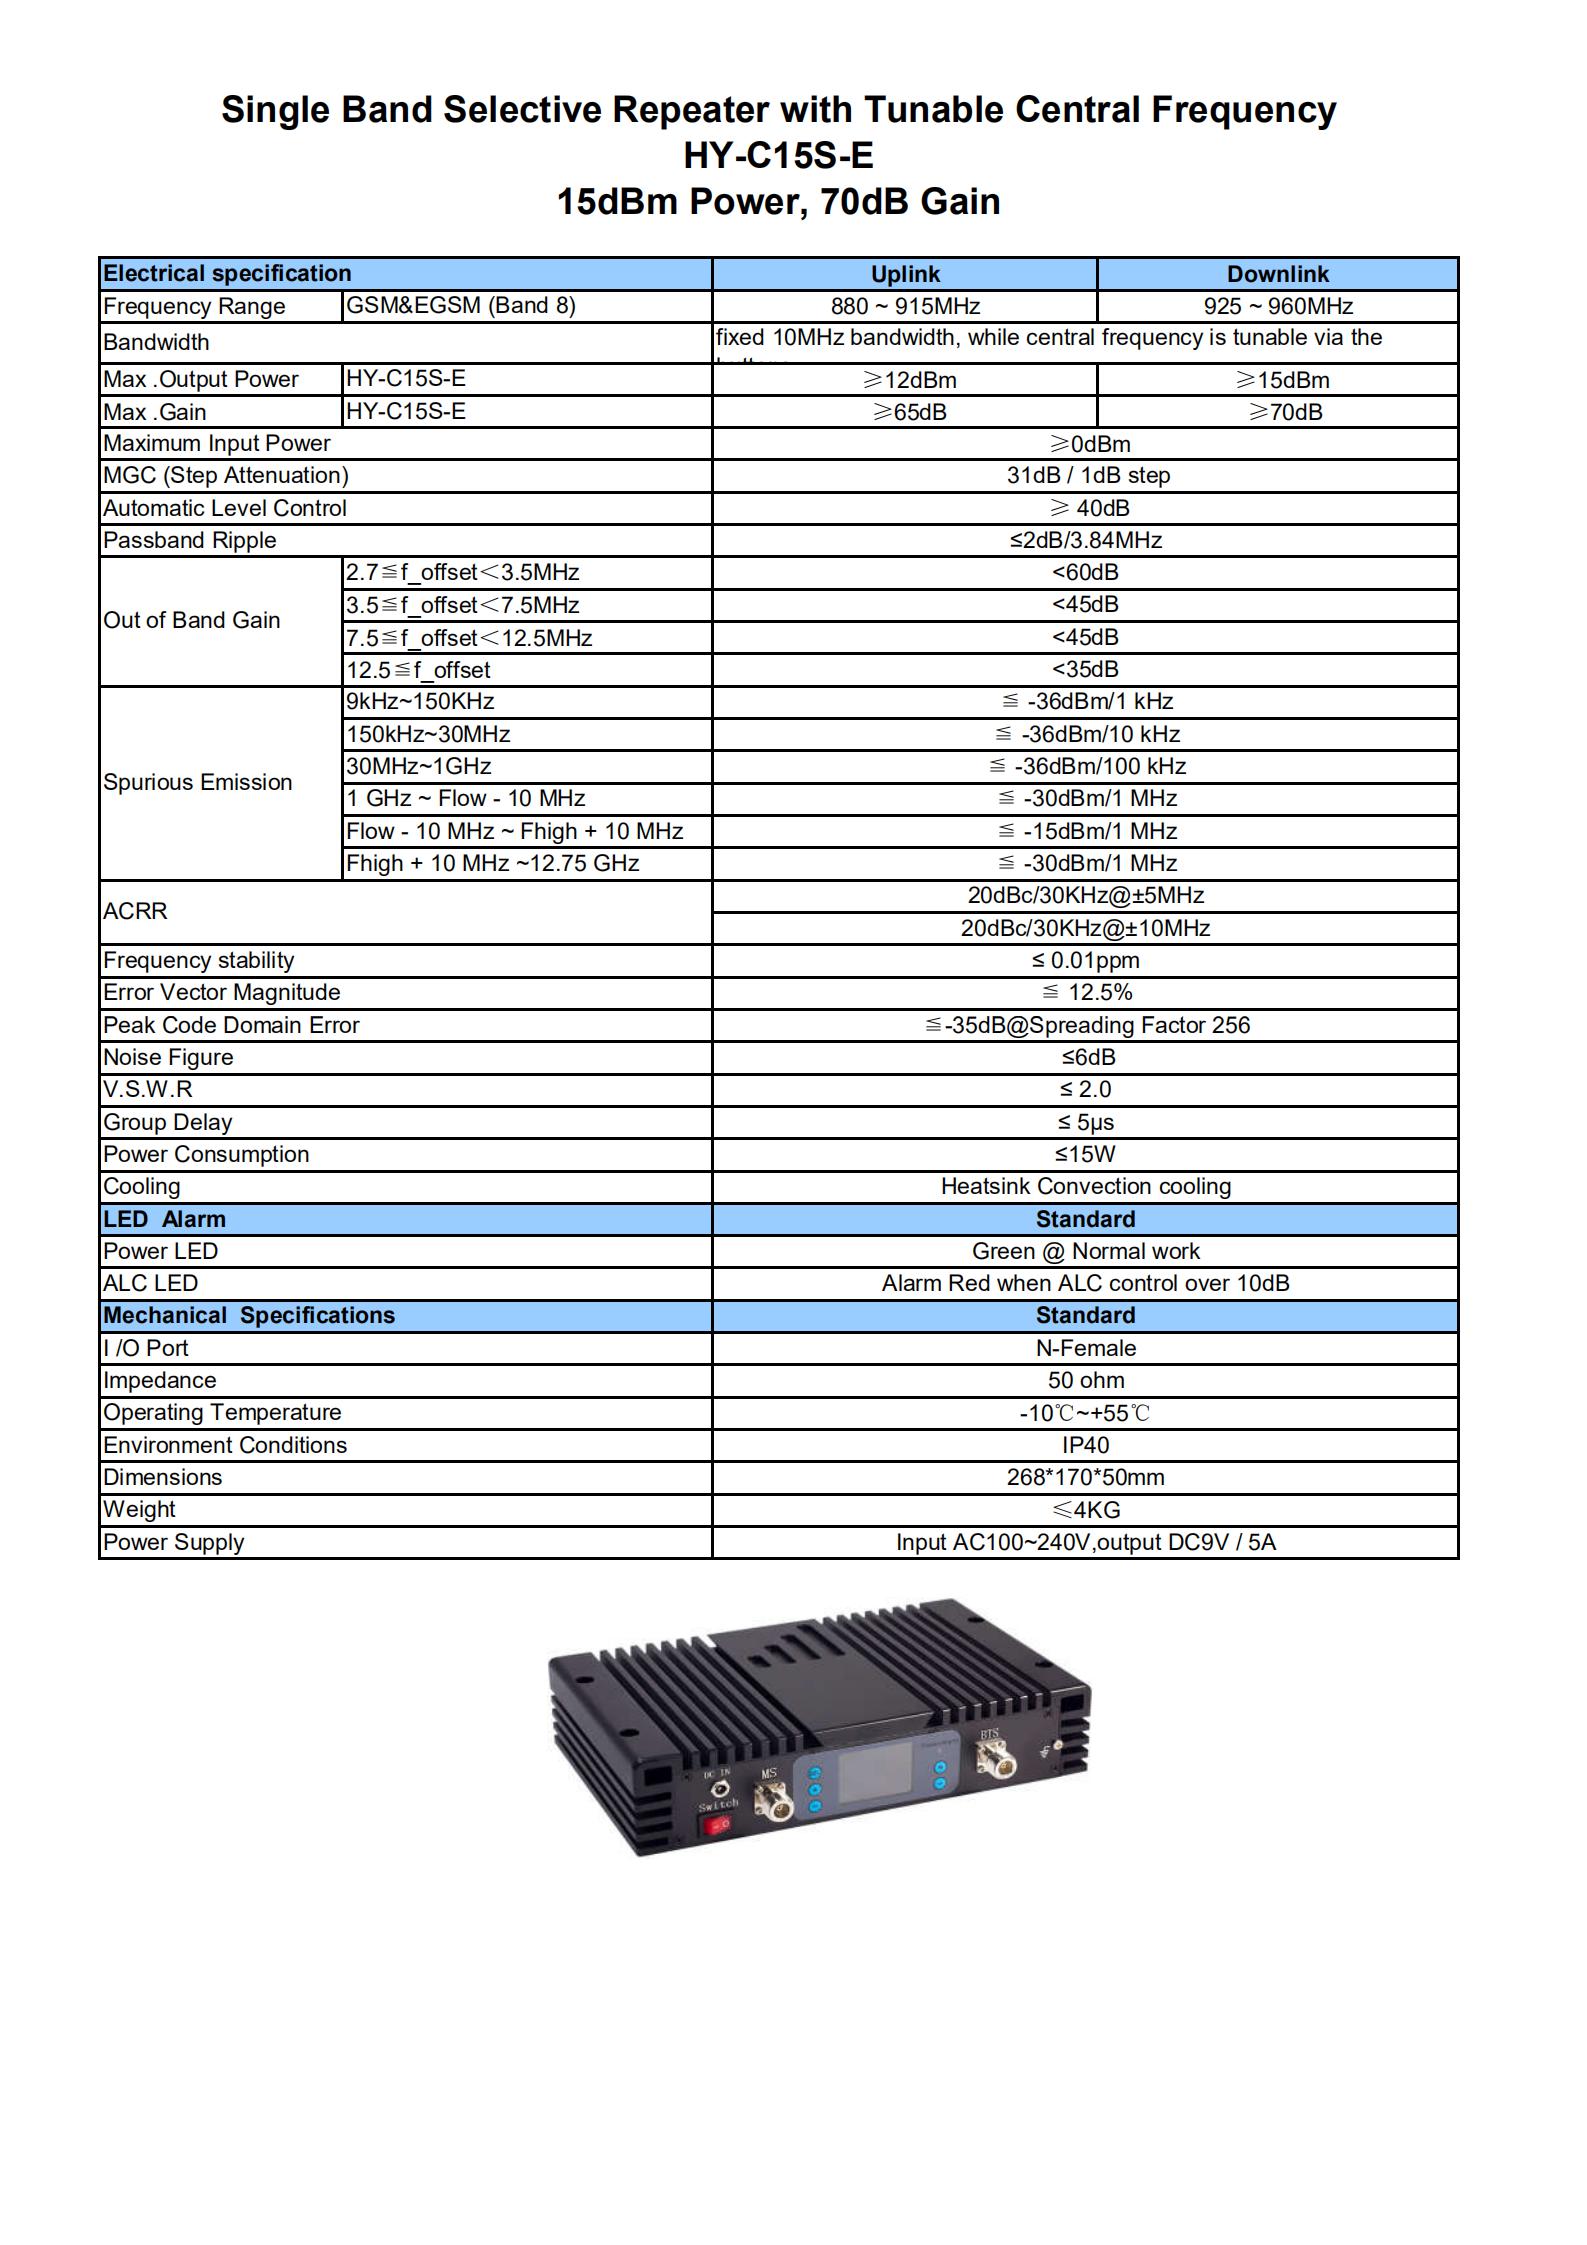 HY-C15S-E Band Selective Repeater Specifications_00.jpg